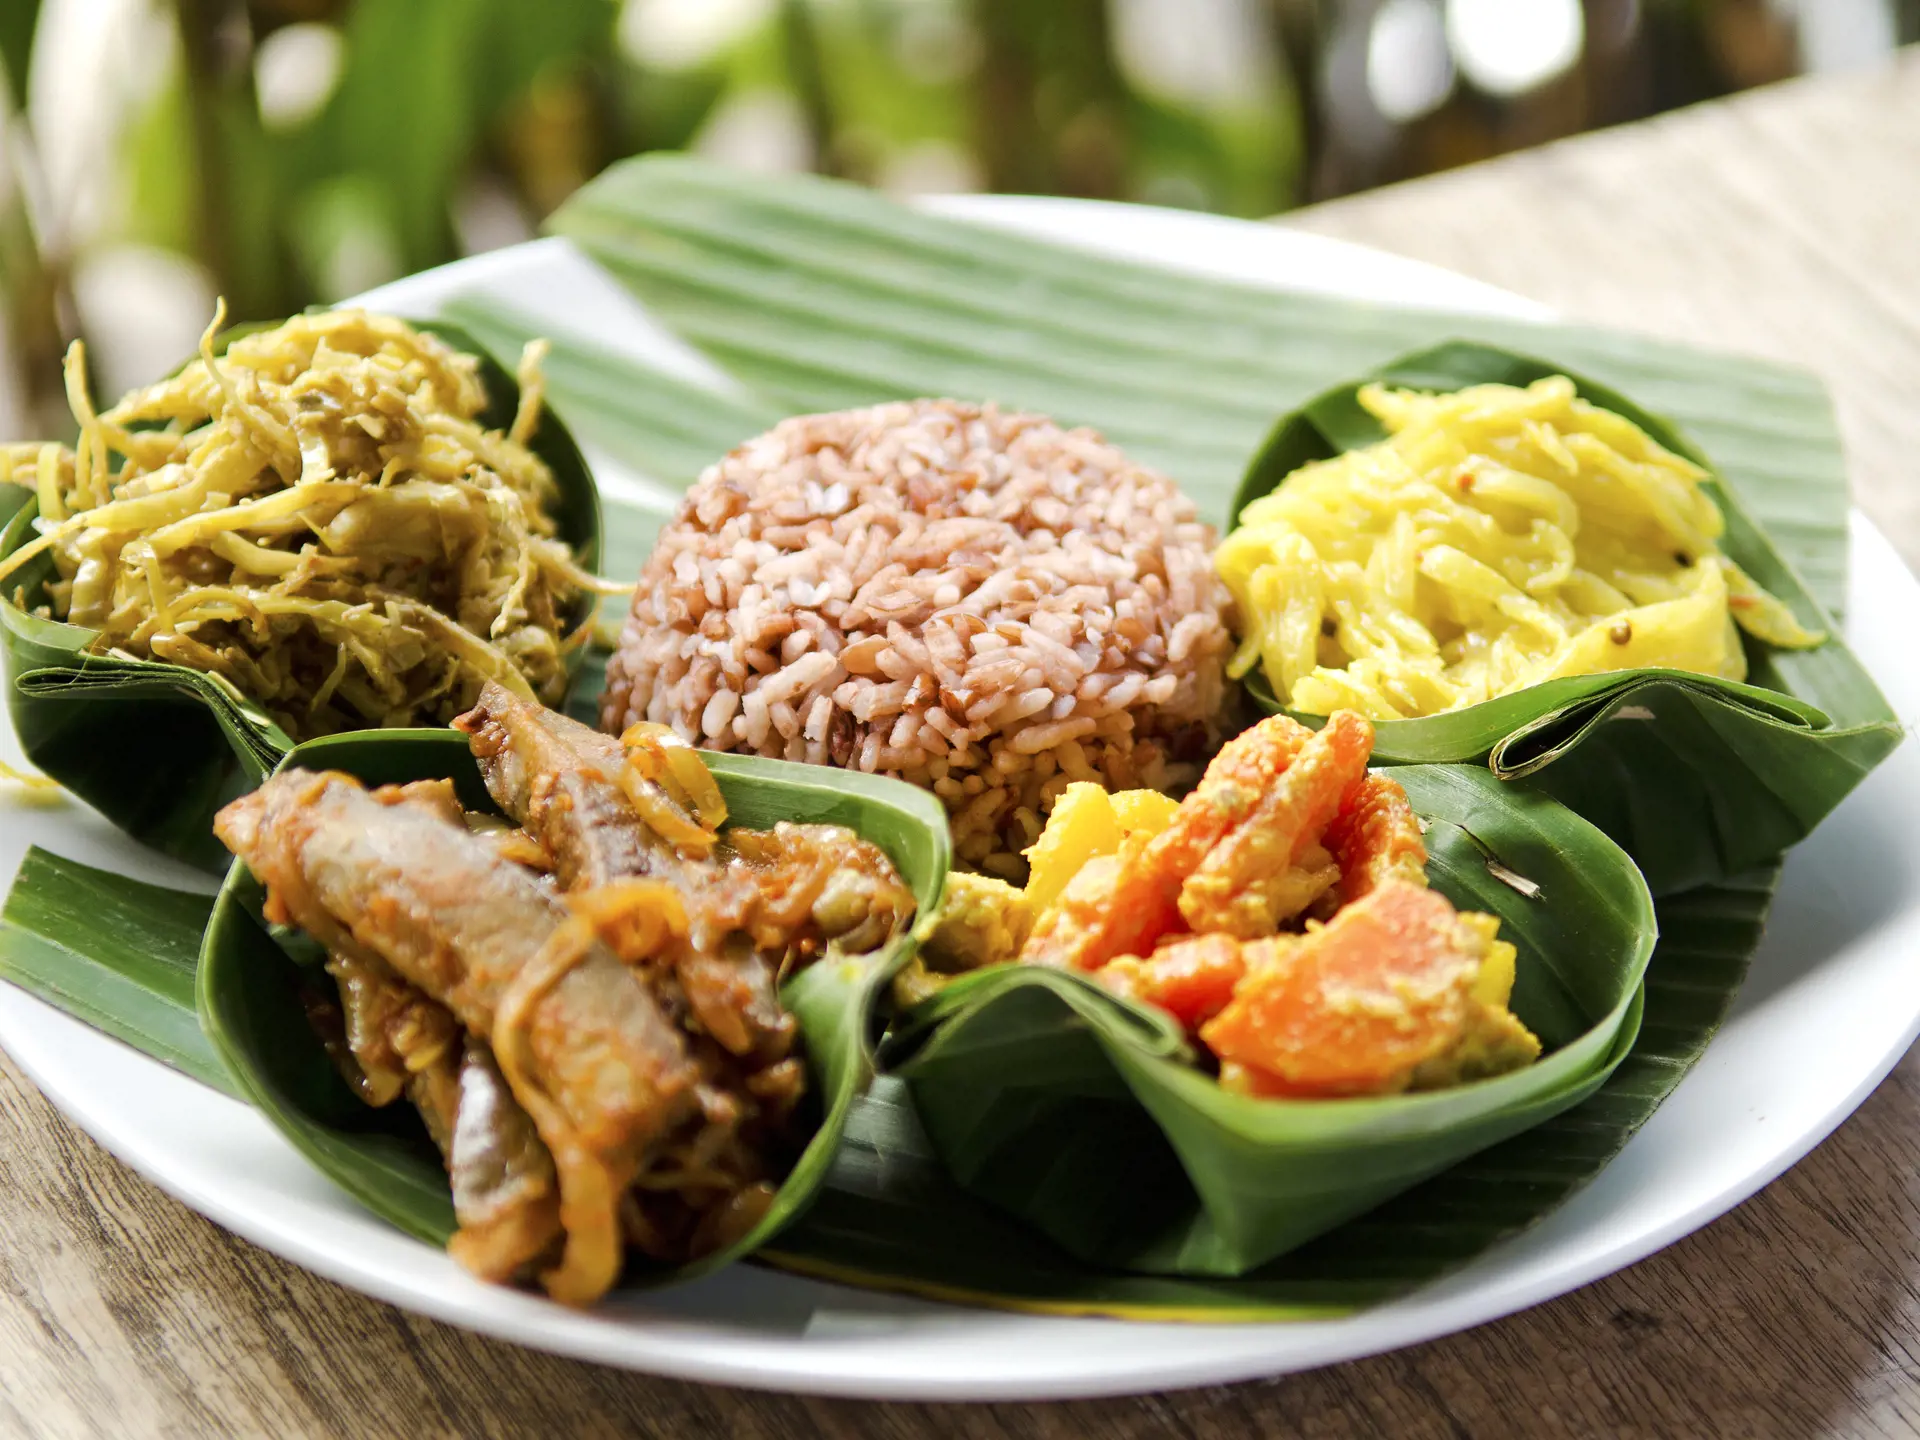 shutterstock_77400334 indonesian food in bali, several curries and rice.jpg